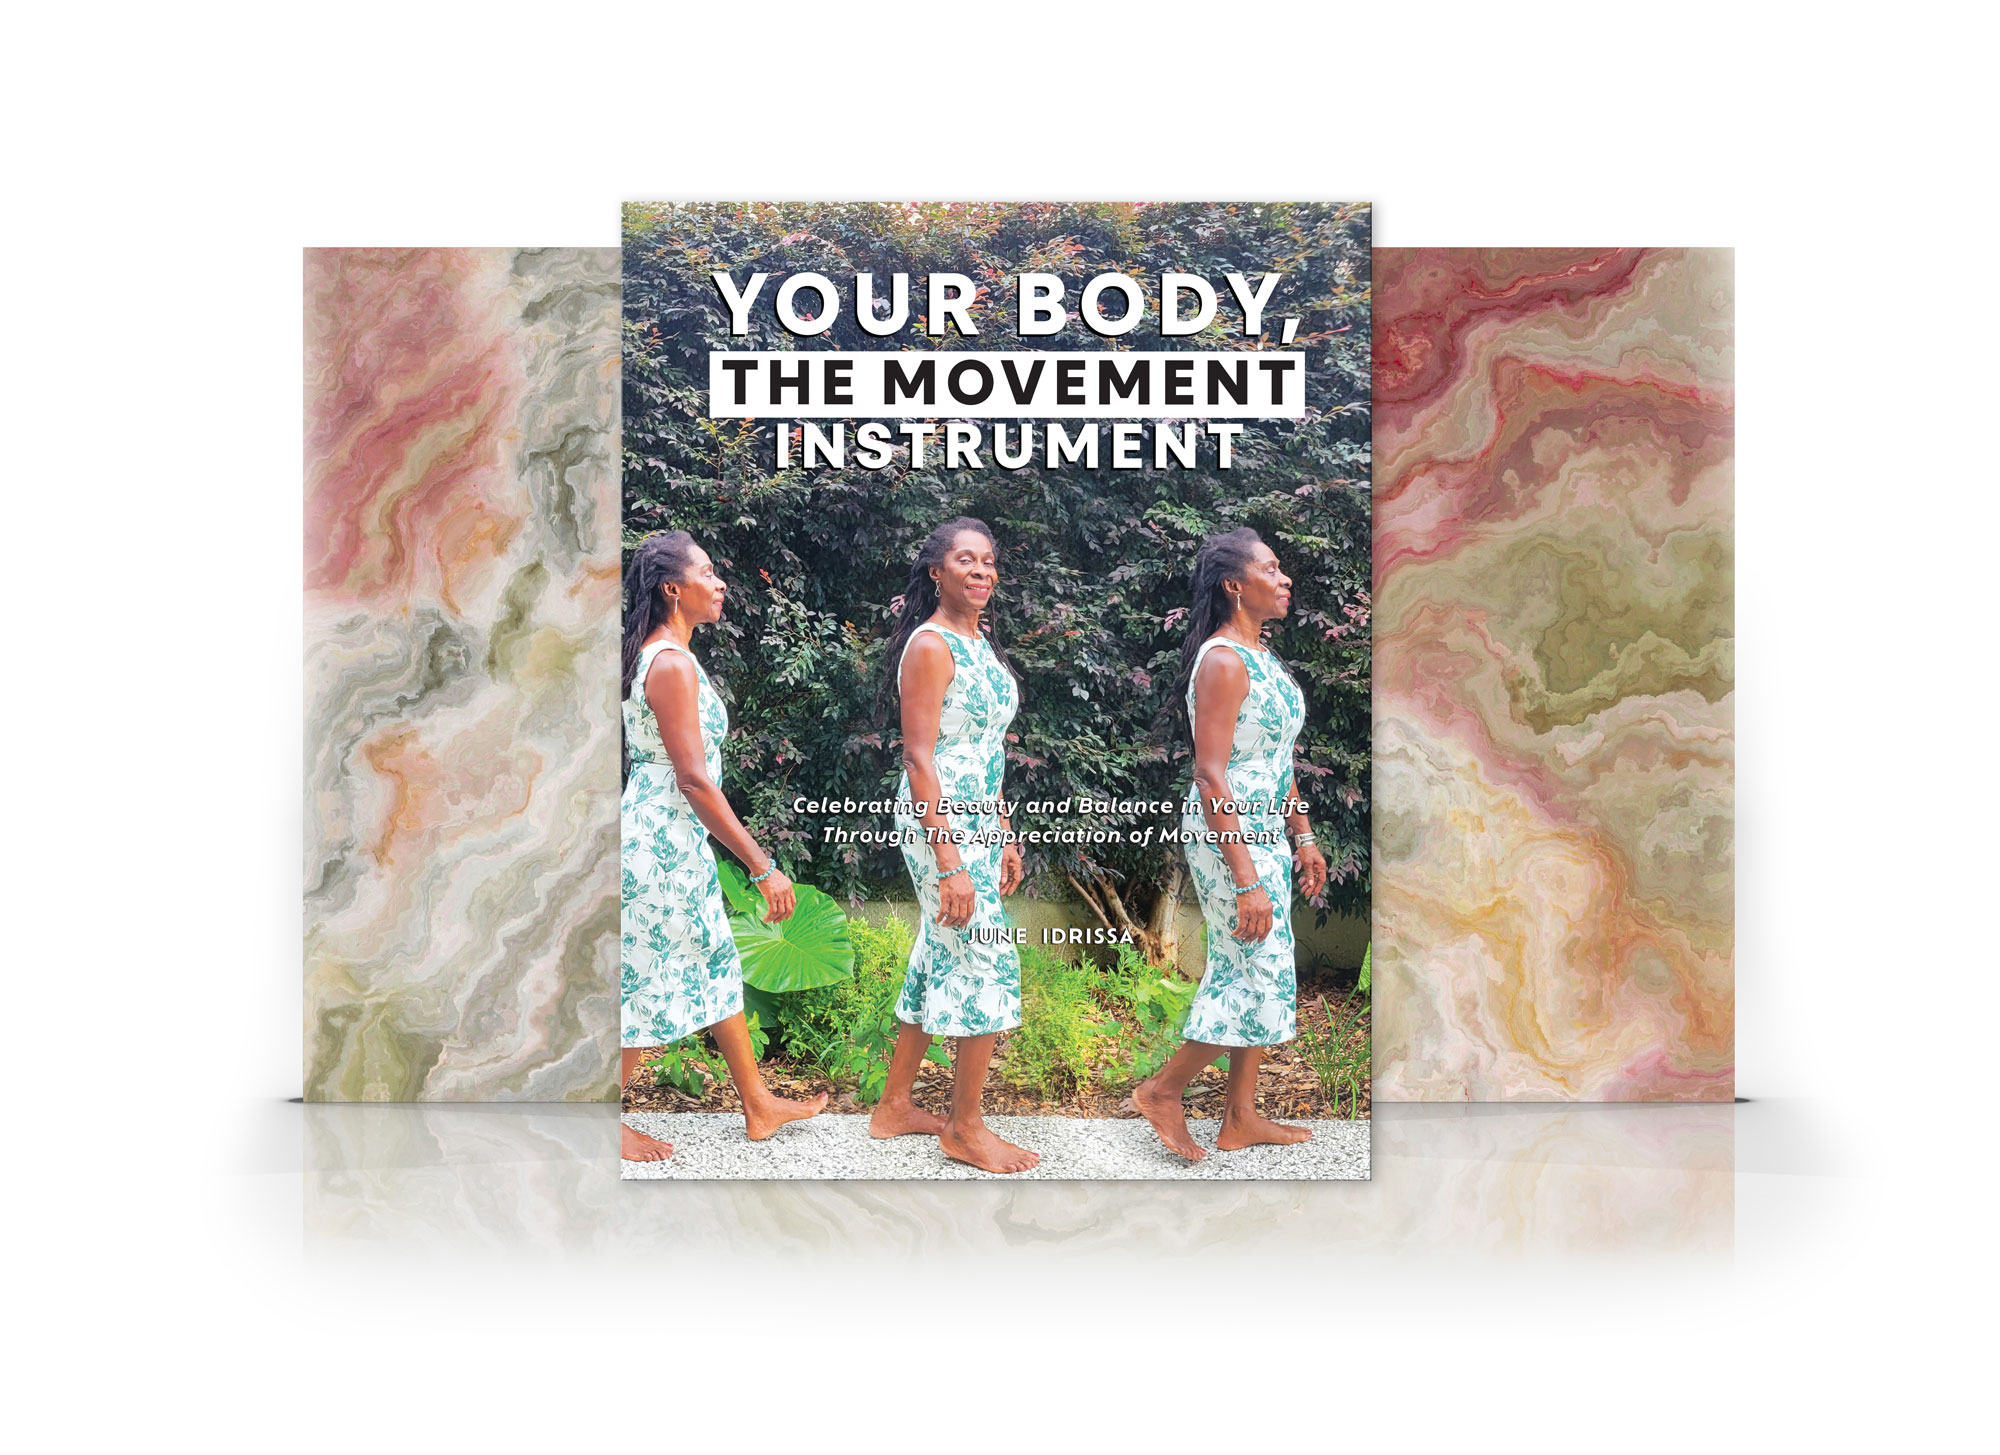 Your Body The Movement Instrument Books UP with Marble & White Background